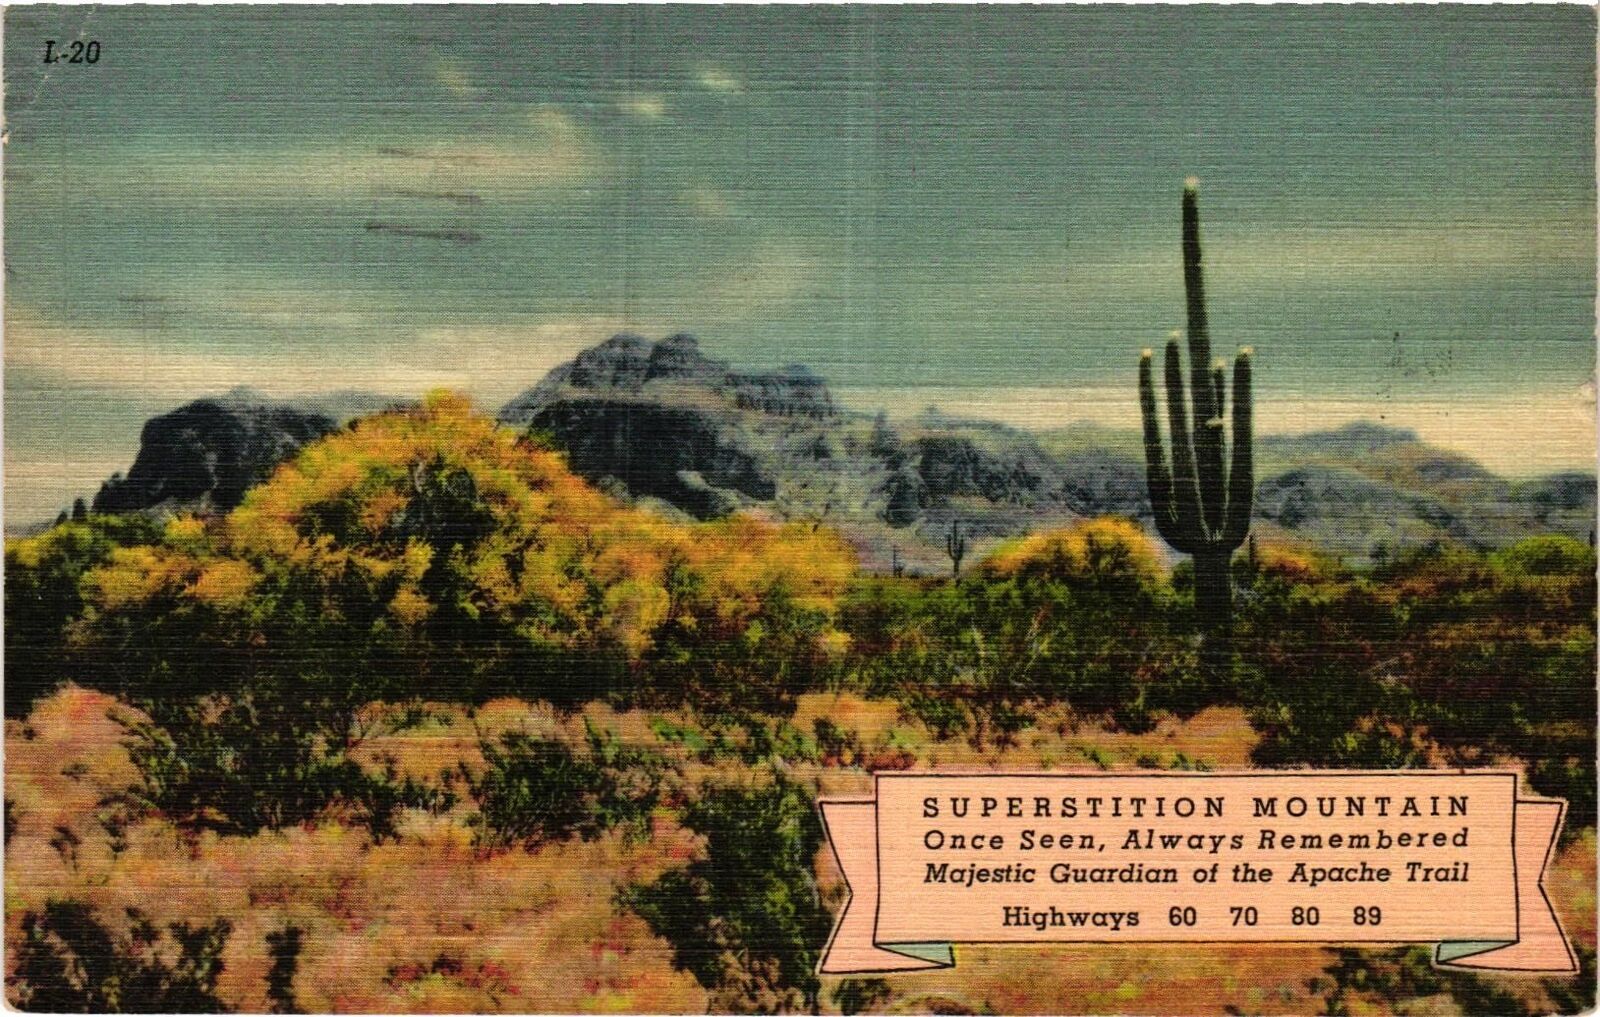 Vintage Postcard- Superstition Mountain. Early 1900s